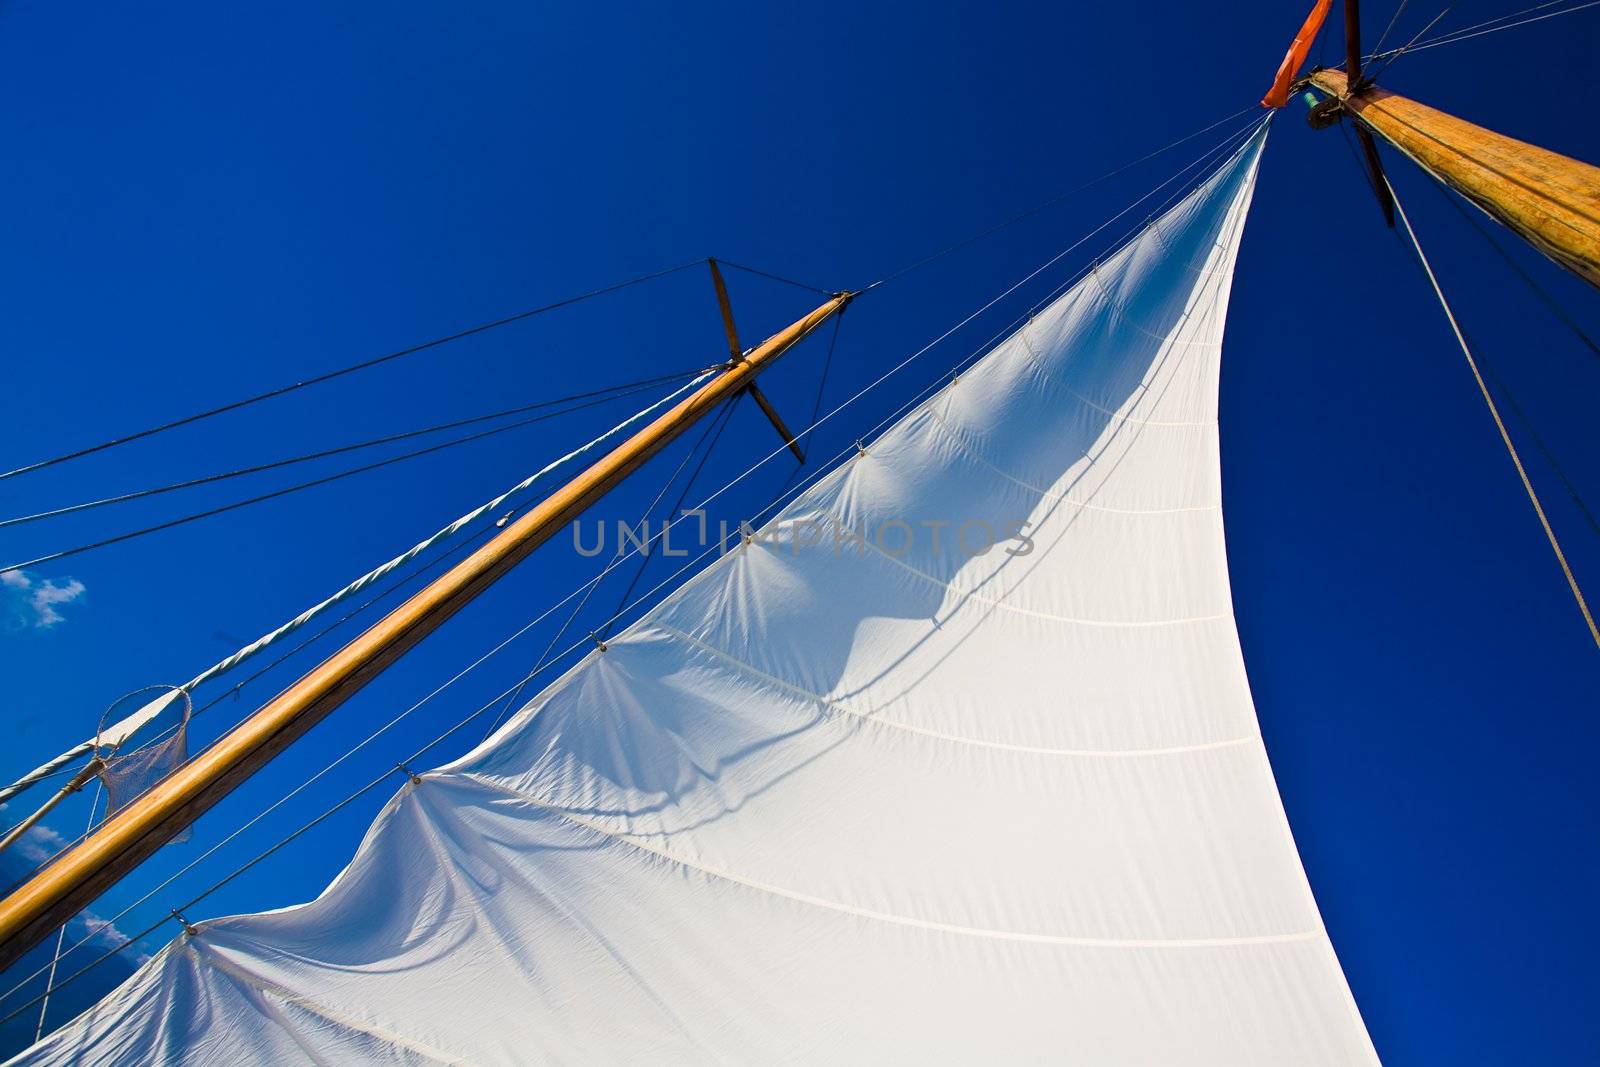 Yacht sail and blue cloudless aky above